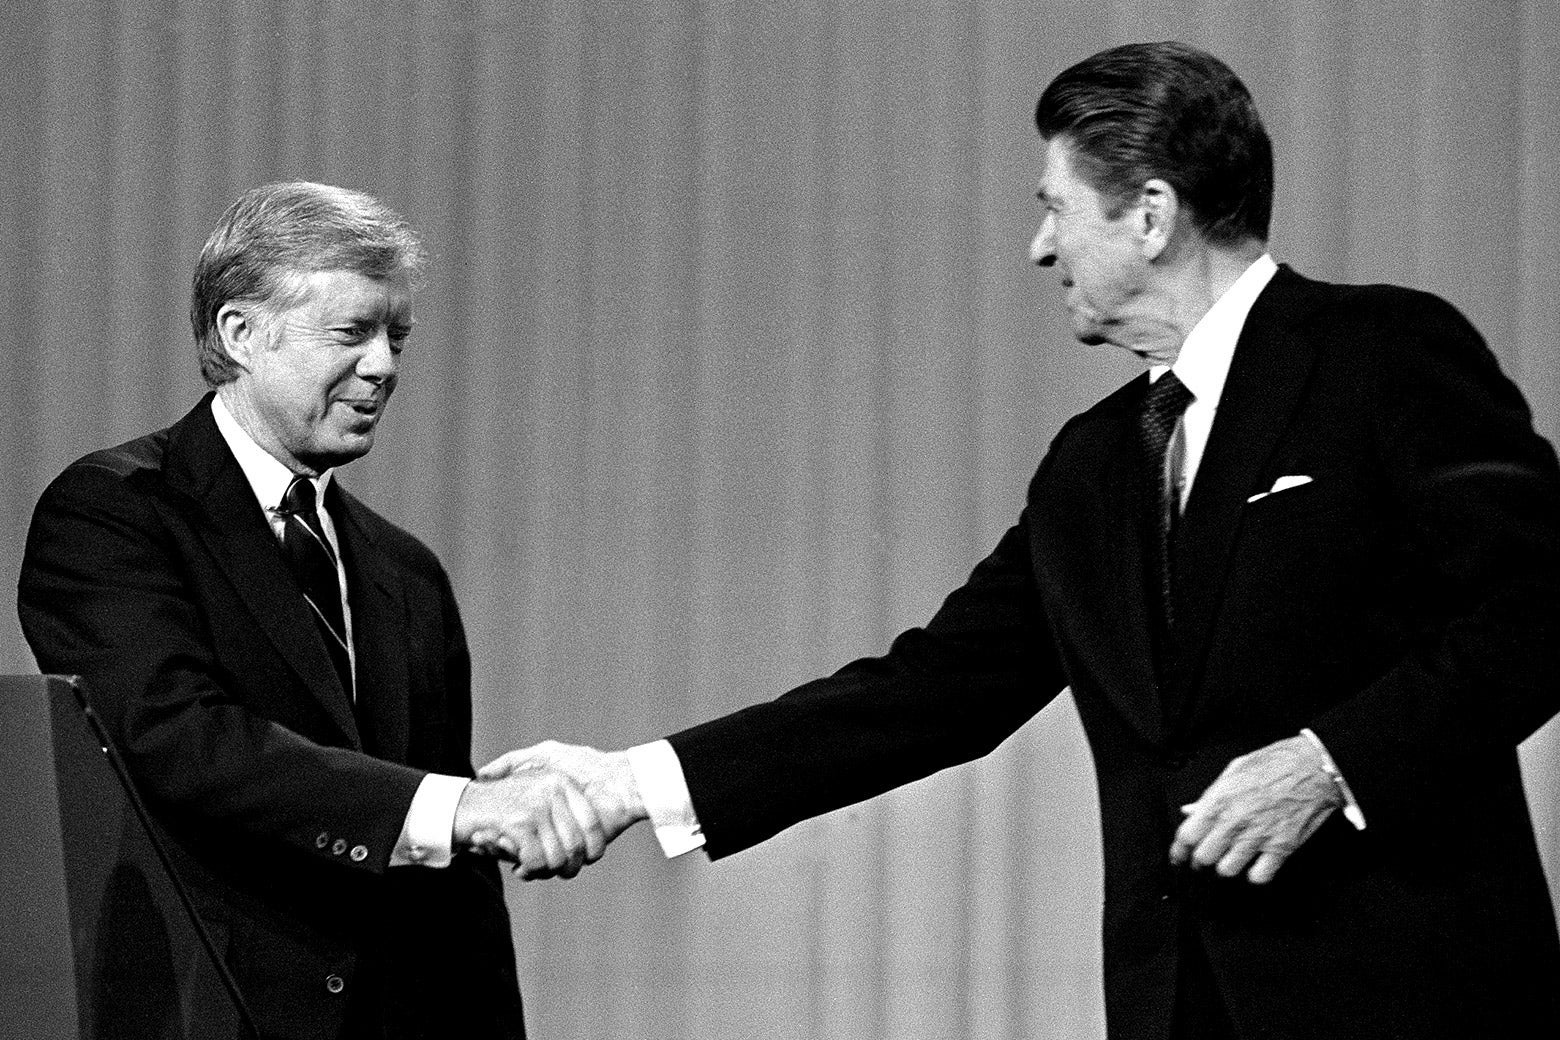 Jimmy Carter shakes hands with Ronald Reagan after debating.